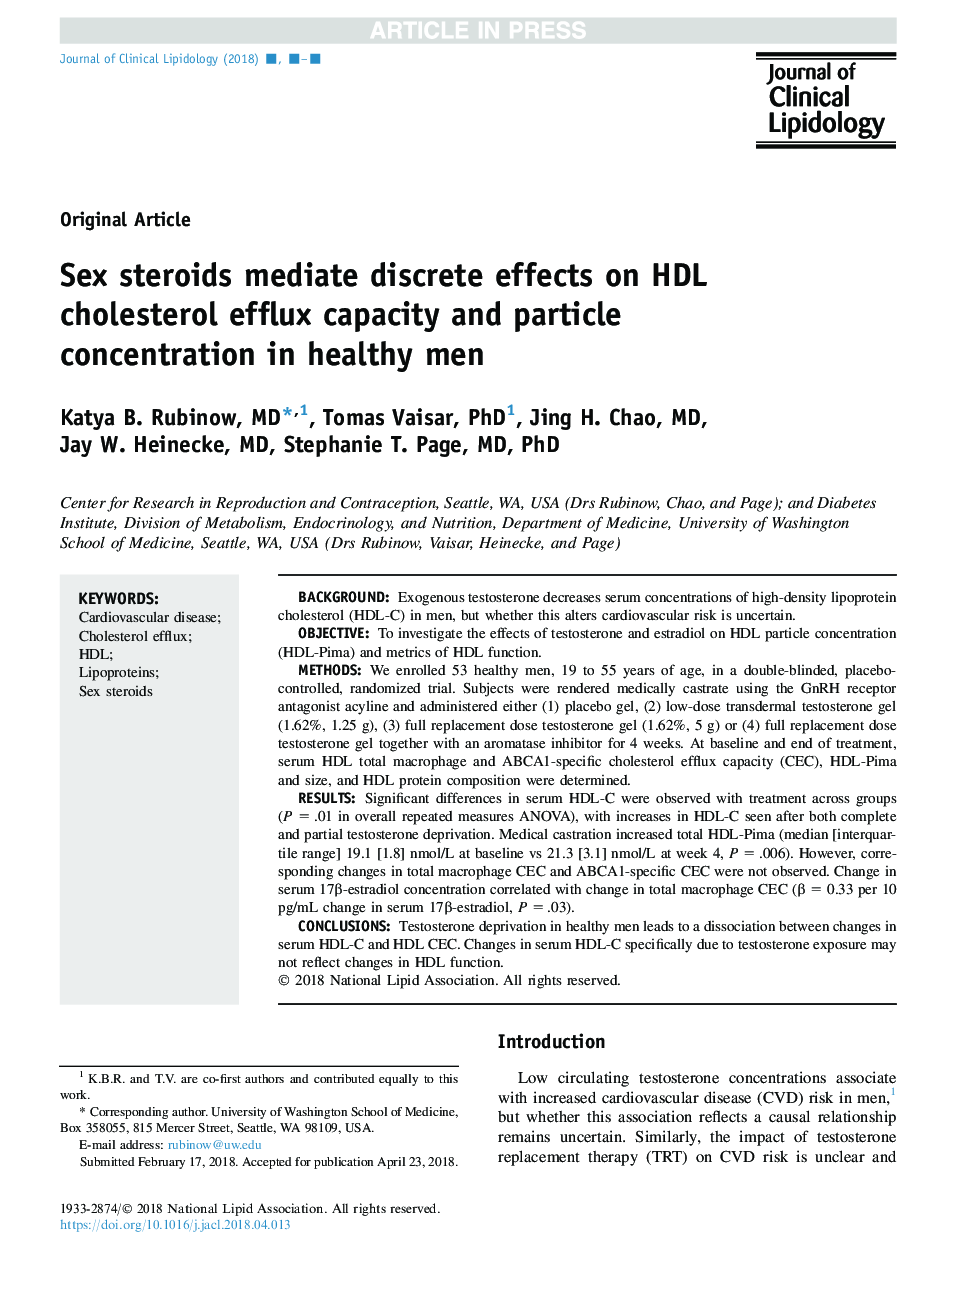 Sex steroids mediate discrete effects on HDL cholesterol efflux capacity and particle concentration in healthy men